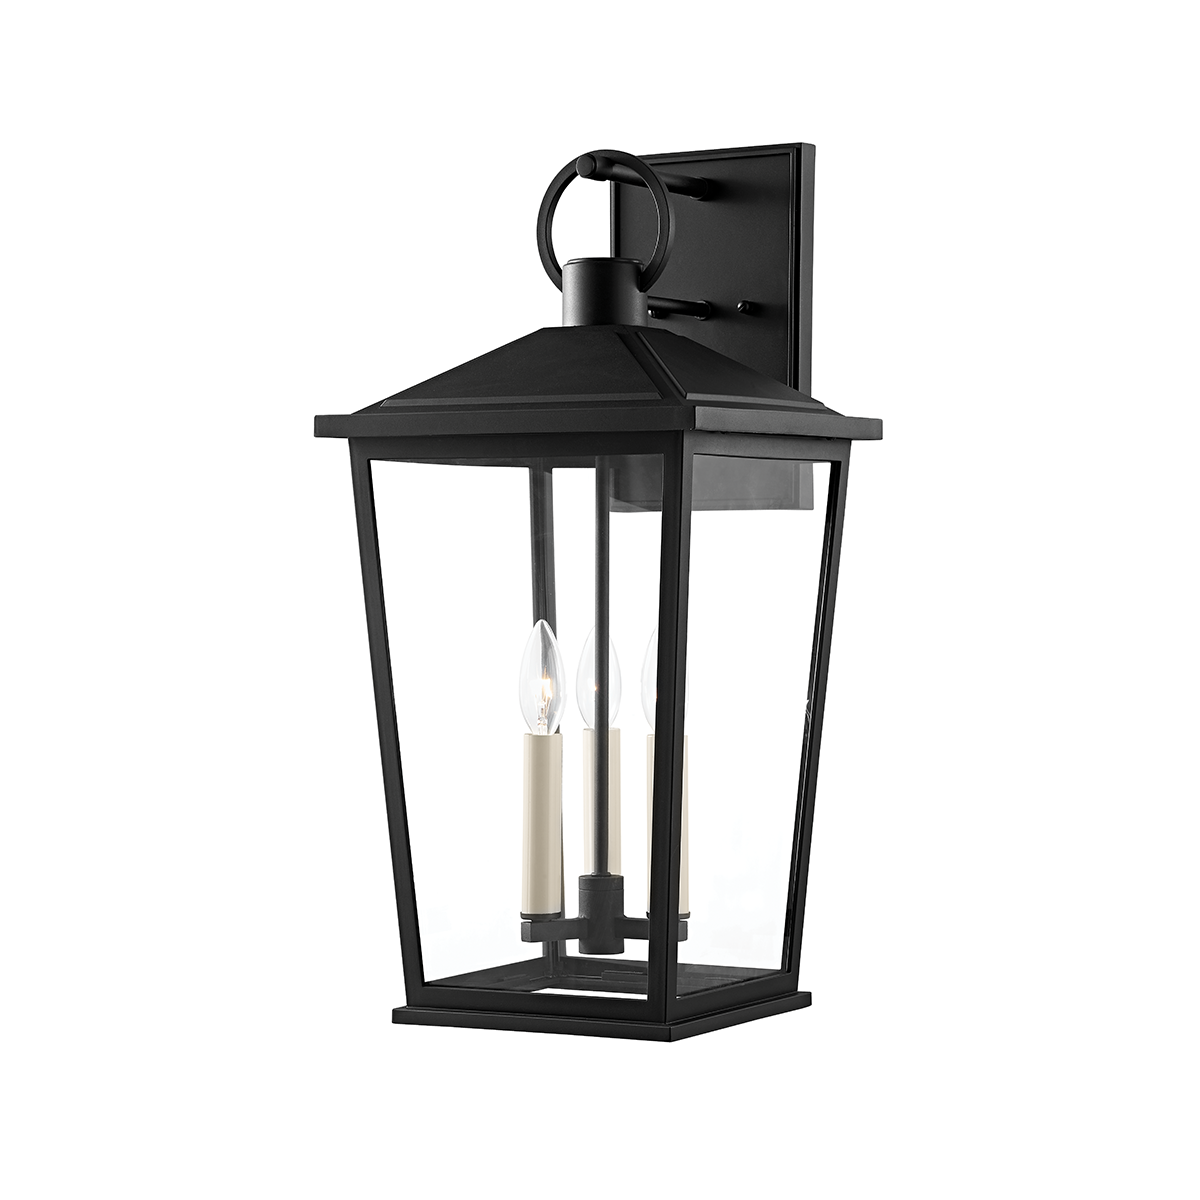 Troy SOREN 3 LIGHT LARGE EXTERIOR WALL SCONCE B8903 Outdoor l Wall Troy Lighting TEXTURE BLACK  